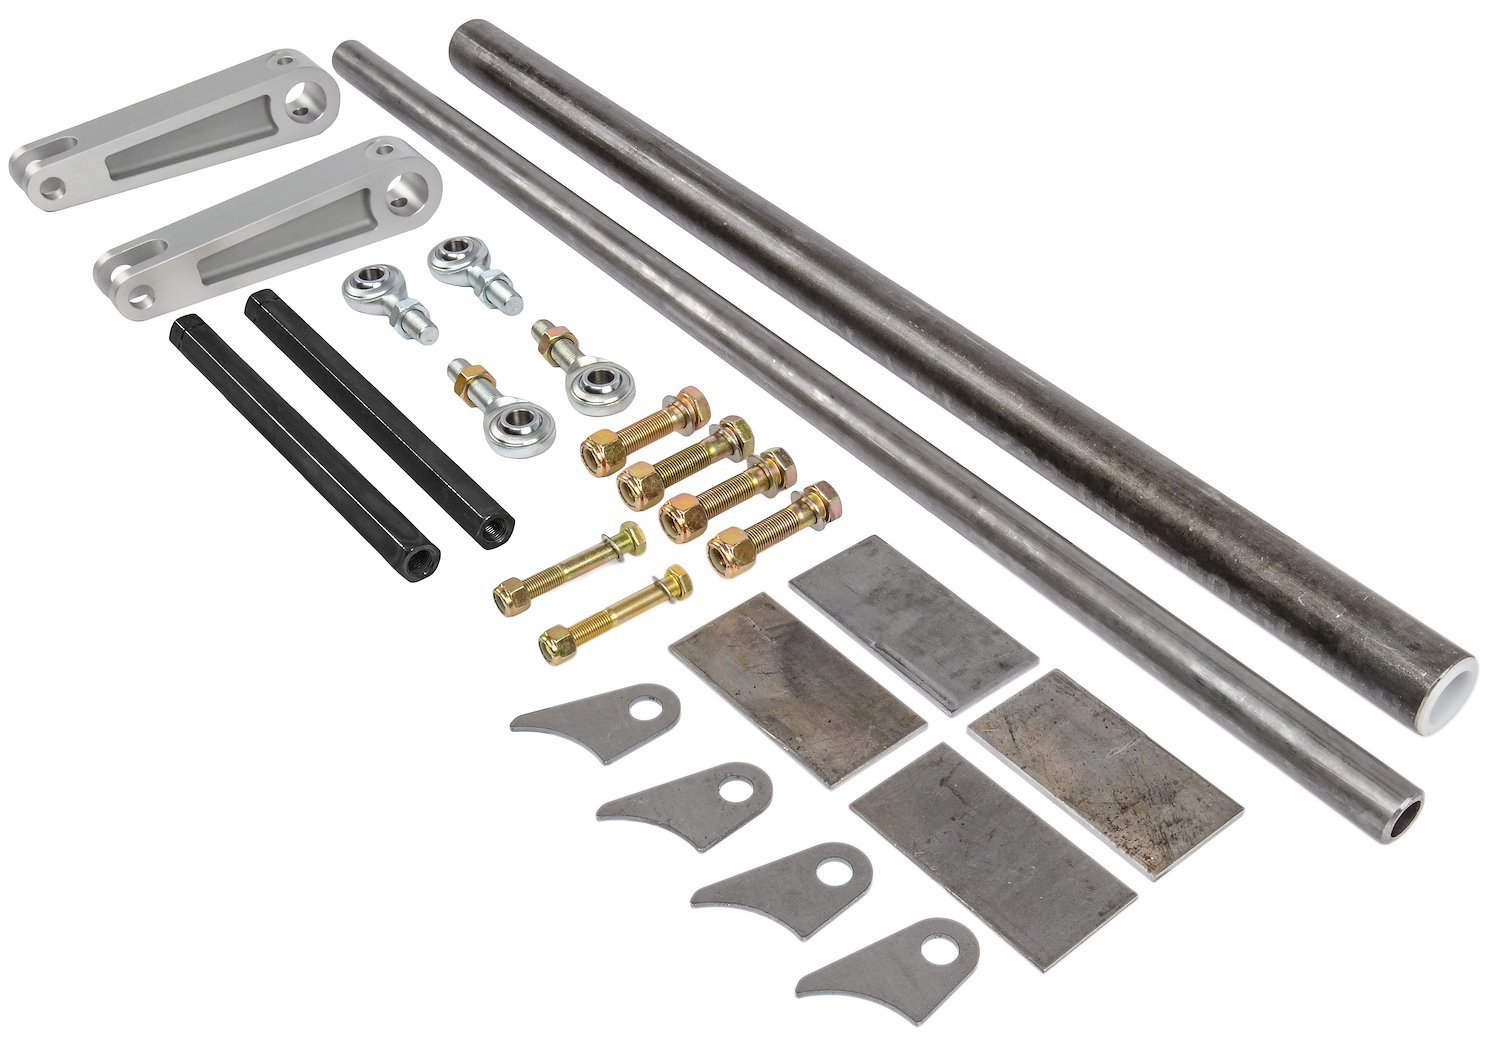 Drag Race Anti-Roll Bar Kit [32 in. Overall